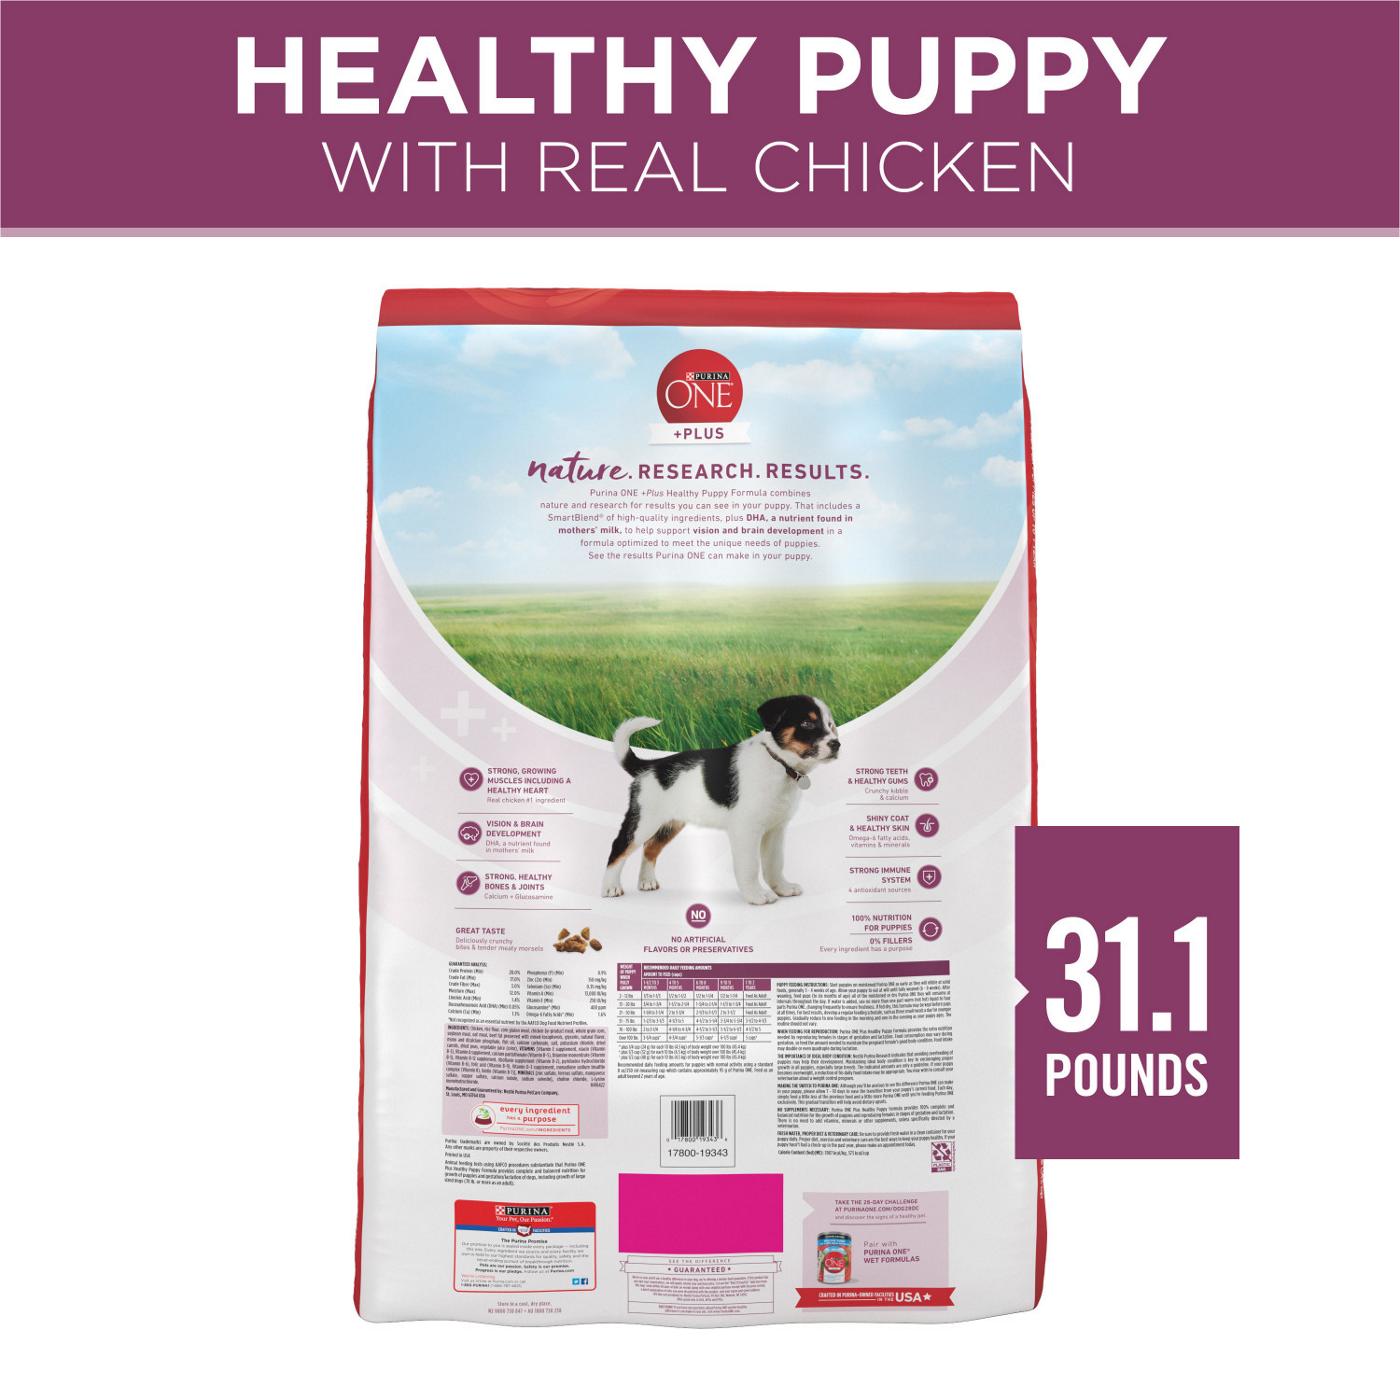 Purina ONE Purina ONE Plus Healthy Puppy Formula High Protein Natural Dry Puppy Food with added vitamins, minerals and nutrients; image 3 of 7